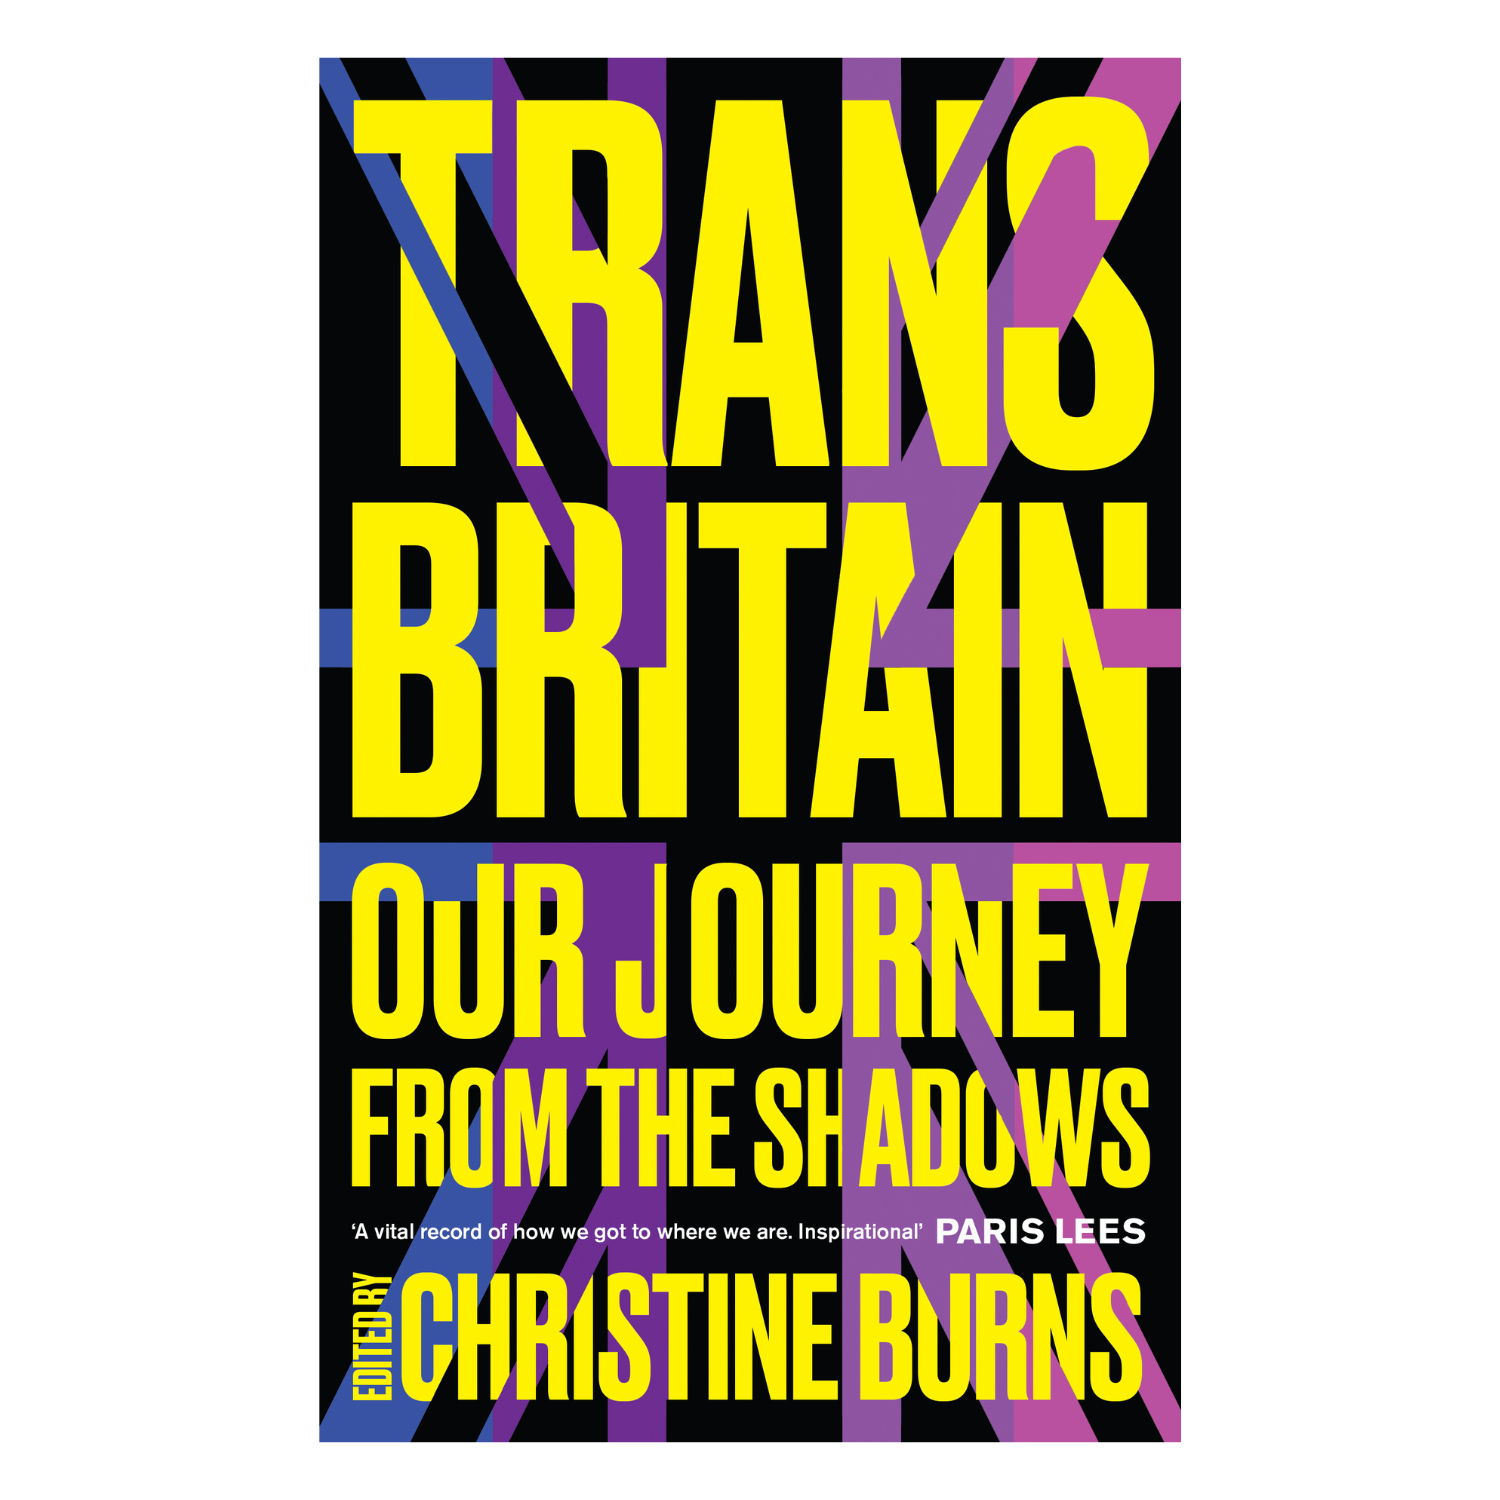 trans britain our journey from the shadows